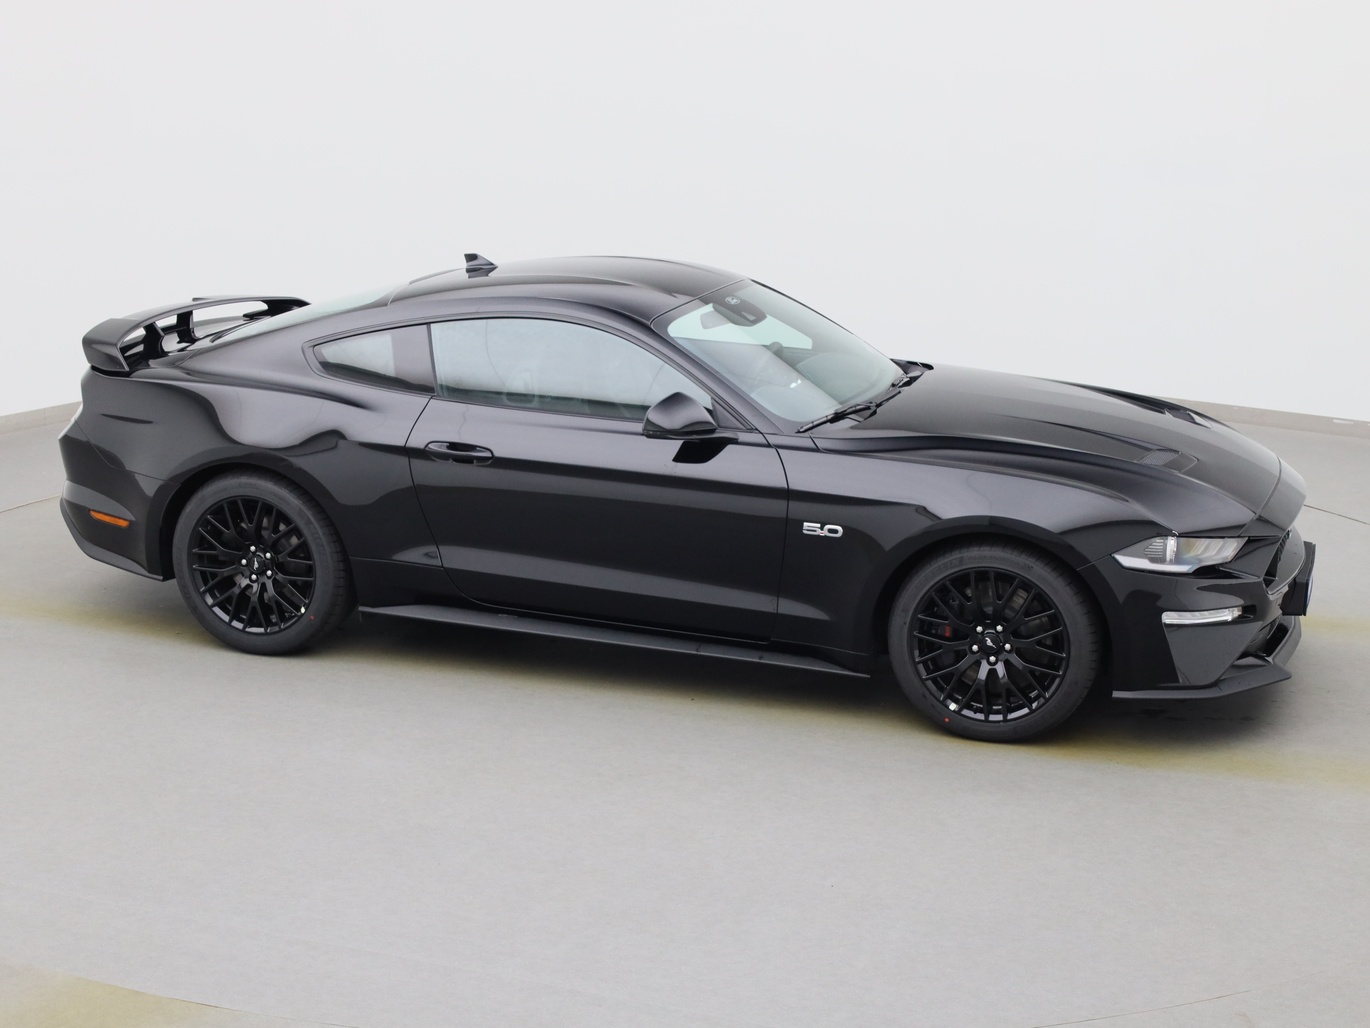  Ford Mustang GT Coupé V8 450PS / Premium 2 / Magne in Iridium Schwarz 